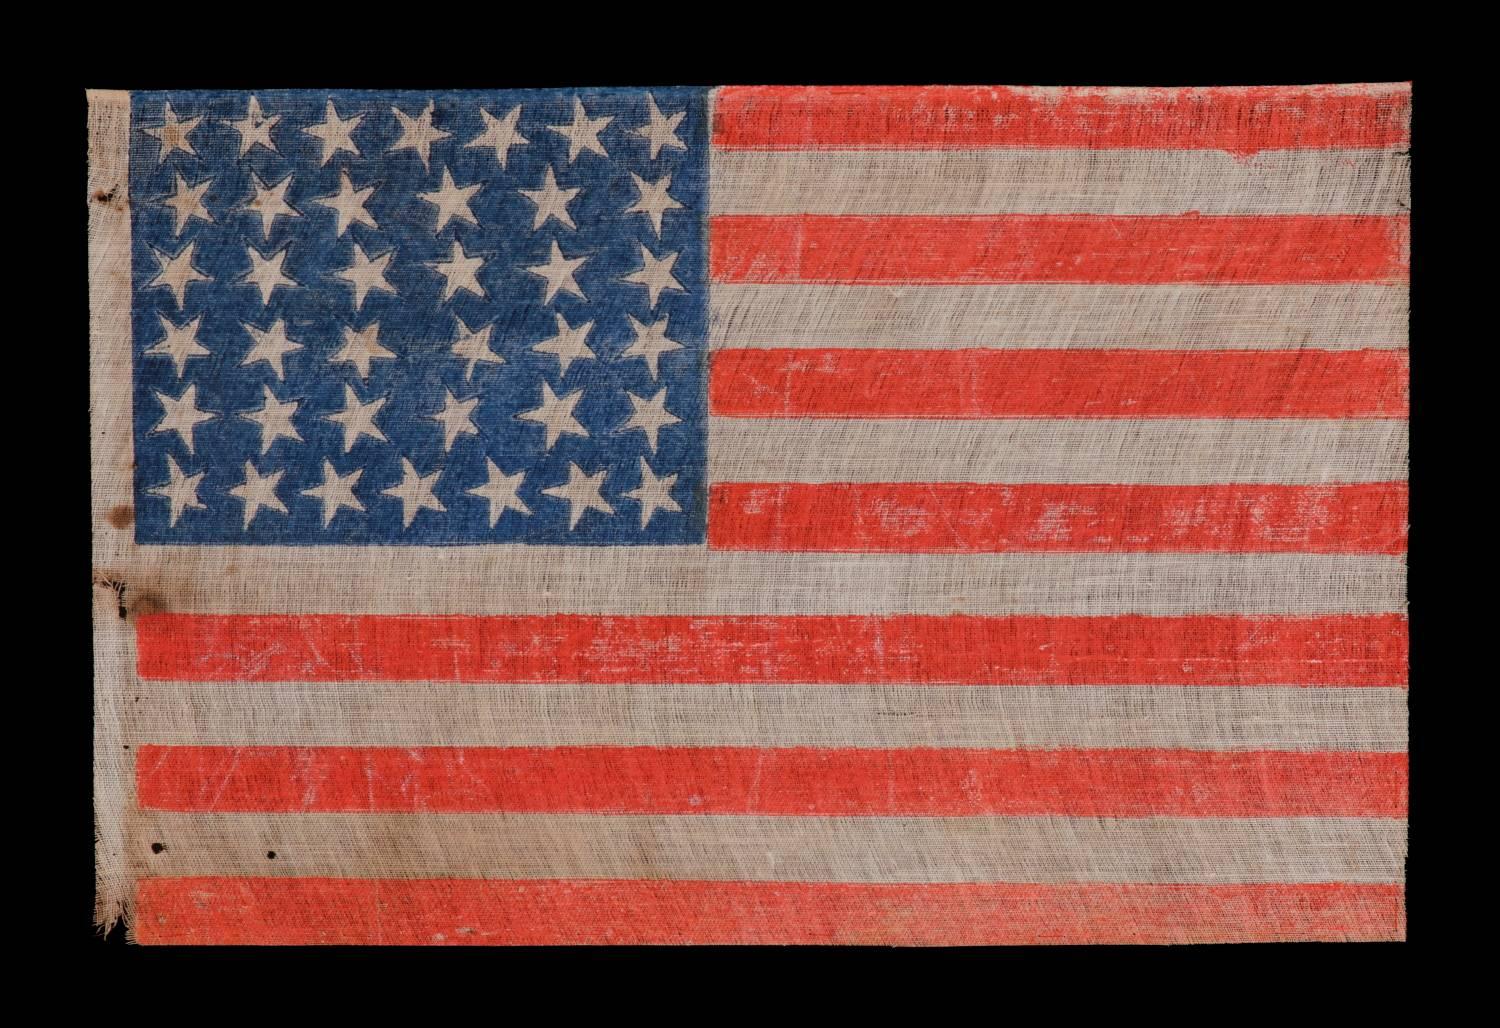 38 ESPECIALLY FOLKY STARS AND ON AN ANTIQUE AMERICAN PARADE FLAG WITH STRONG COLORATION, ON COTTON AND FLAX BLENDED FABRIC WITH A CRUDE WEAVE, COLORADO STATEHOOD, 1876-1889: 

38 star American national parade flag, printed on coarse, glazed cotton.